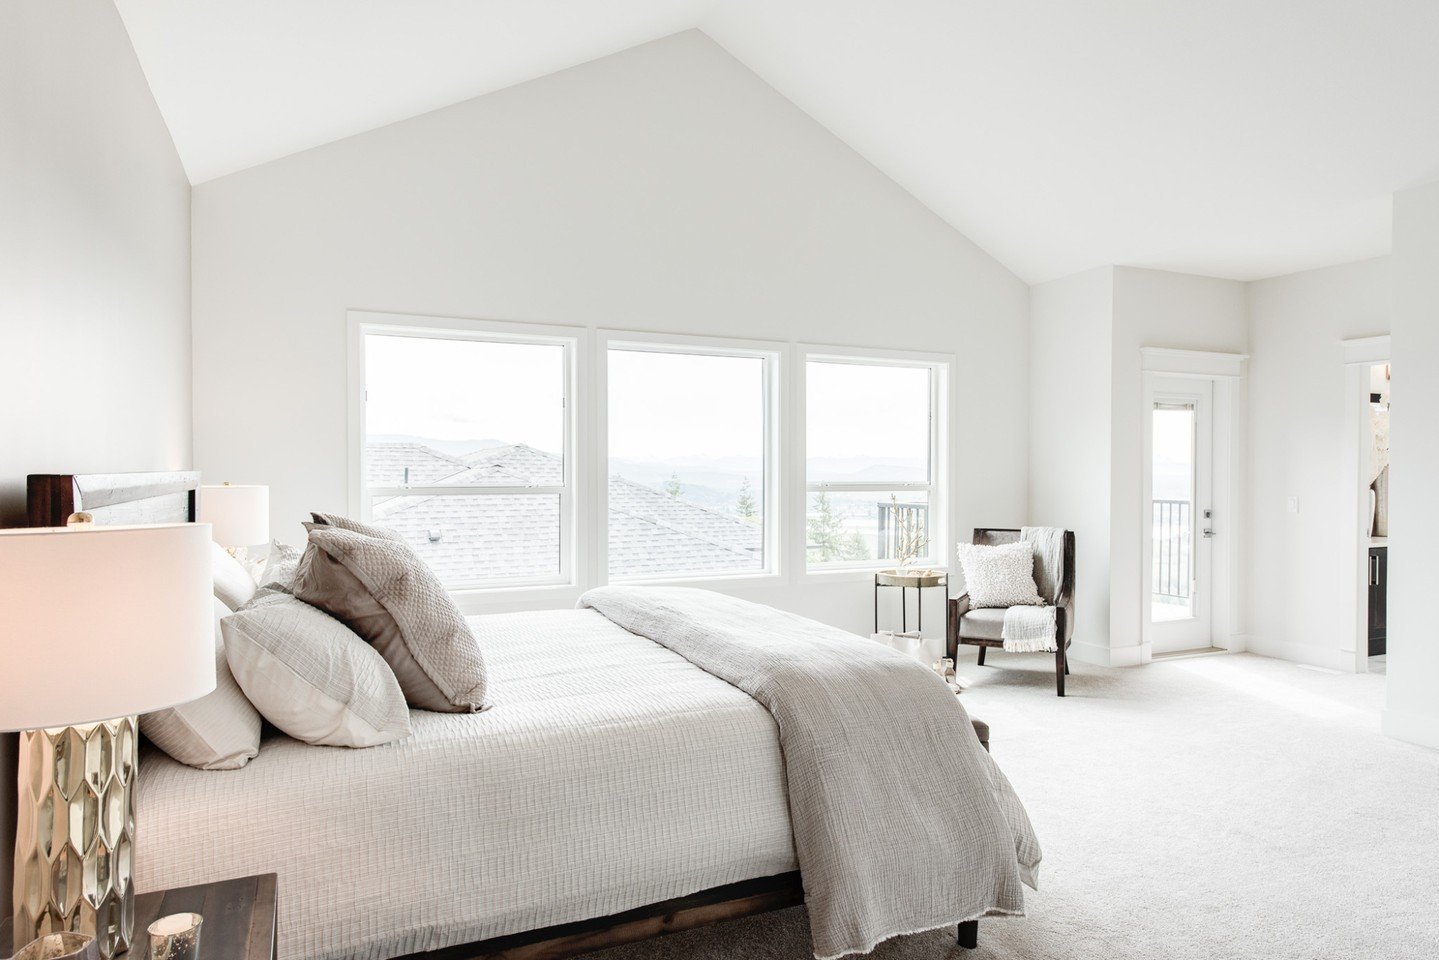 Happy National Clean Your Room Day! Time to declutter, organize, and create a space that sparks joy. 🧹✨

This Burke Mountain project features a stunning cathedral ceiling making it the perfect space to rest and relax!
.
.
.
.
.
#Foxridgehomes #inter